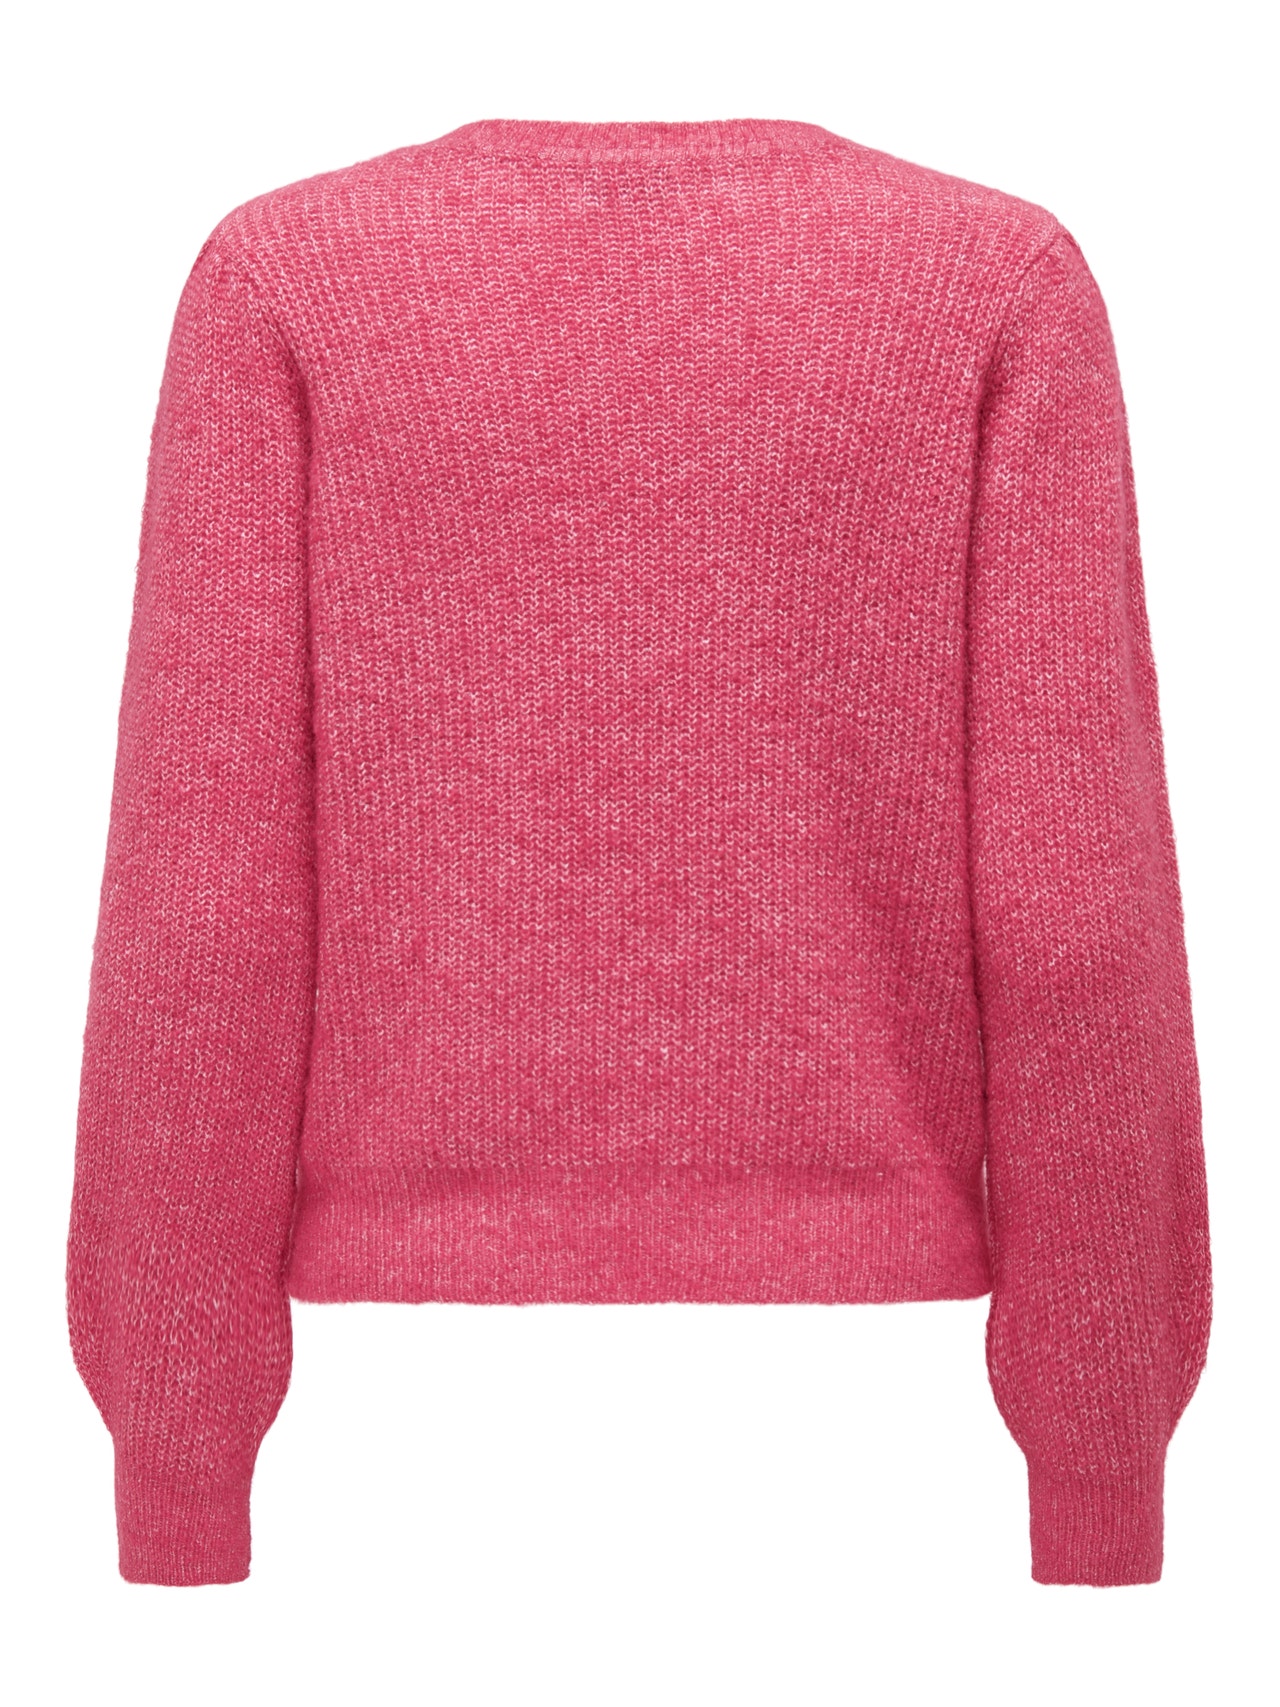 ONLY O-hals Pullover -Raspberry Wine - 15266183